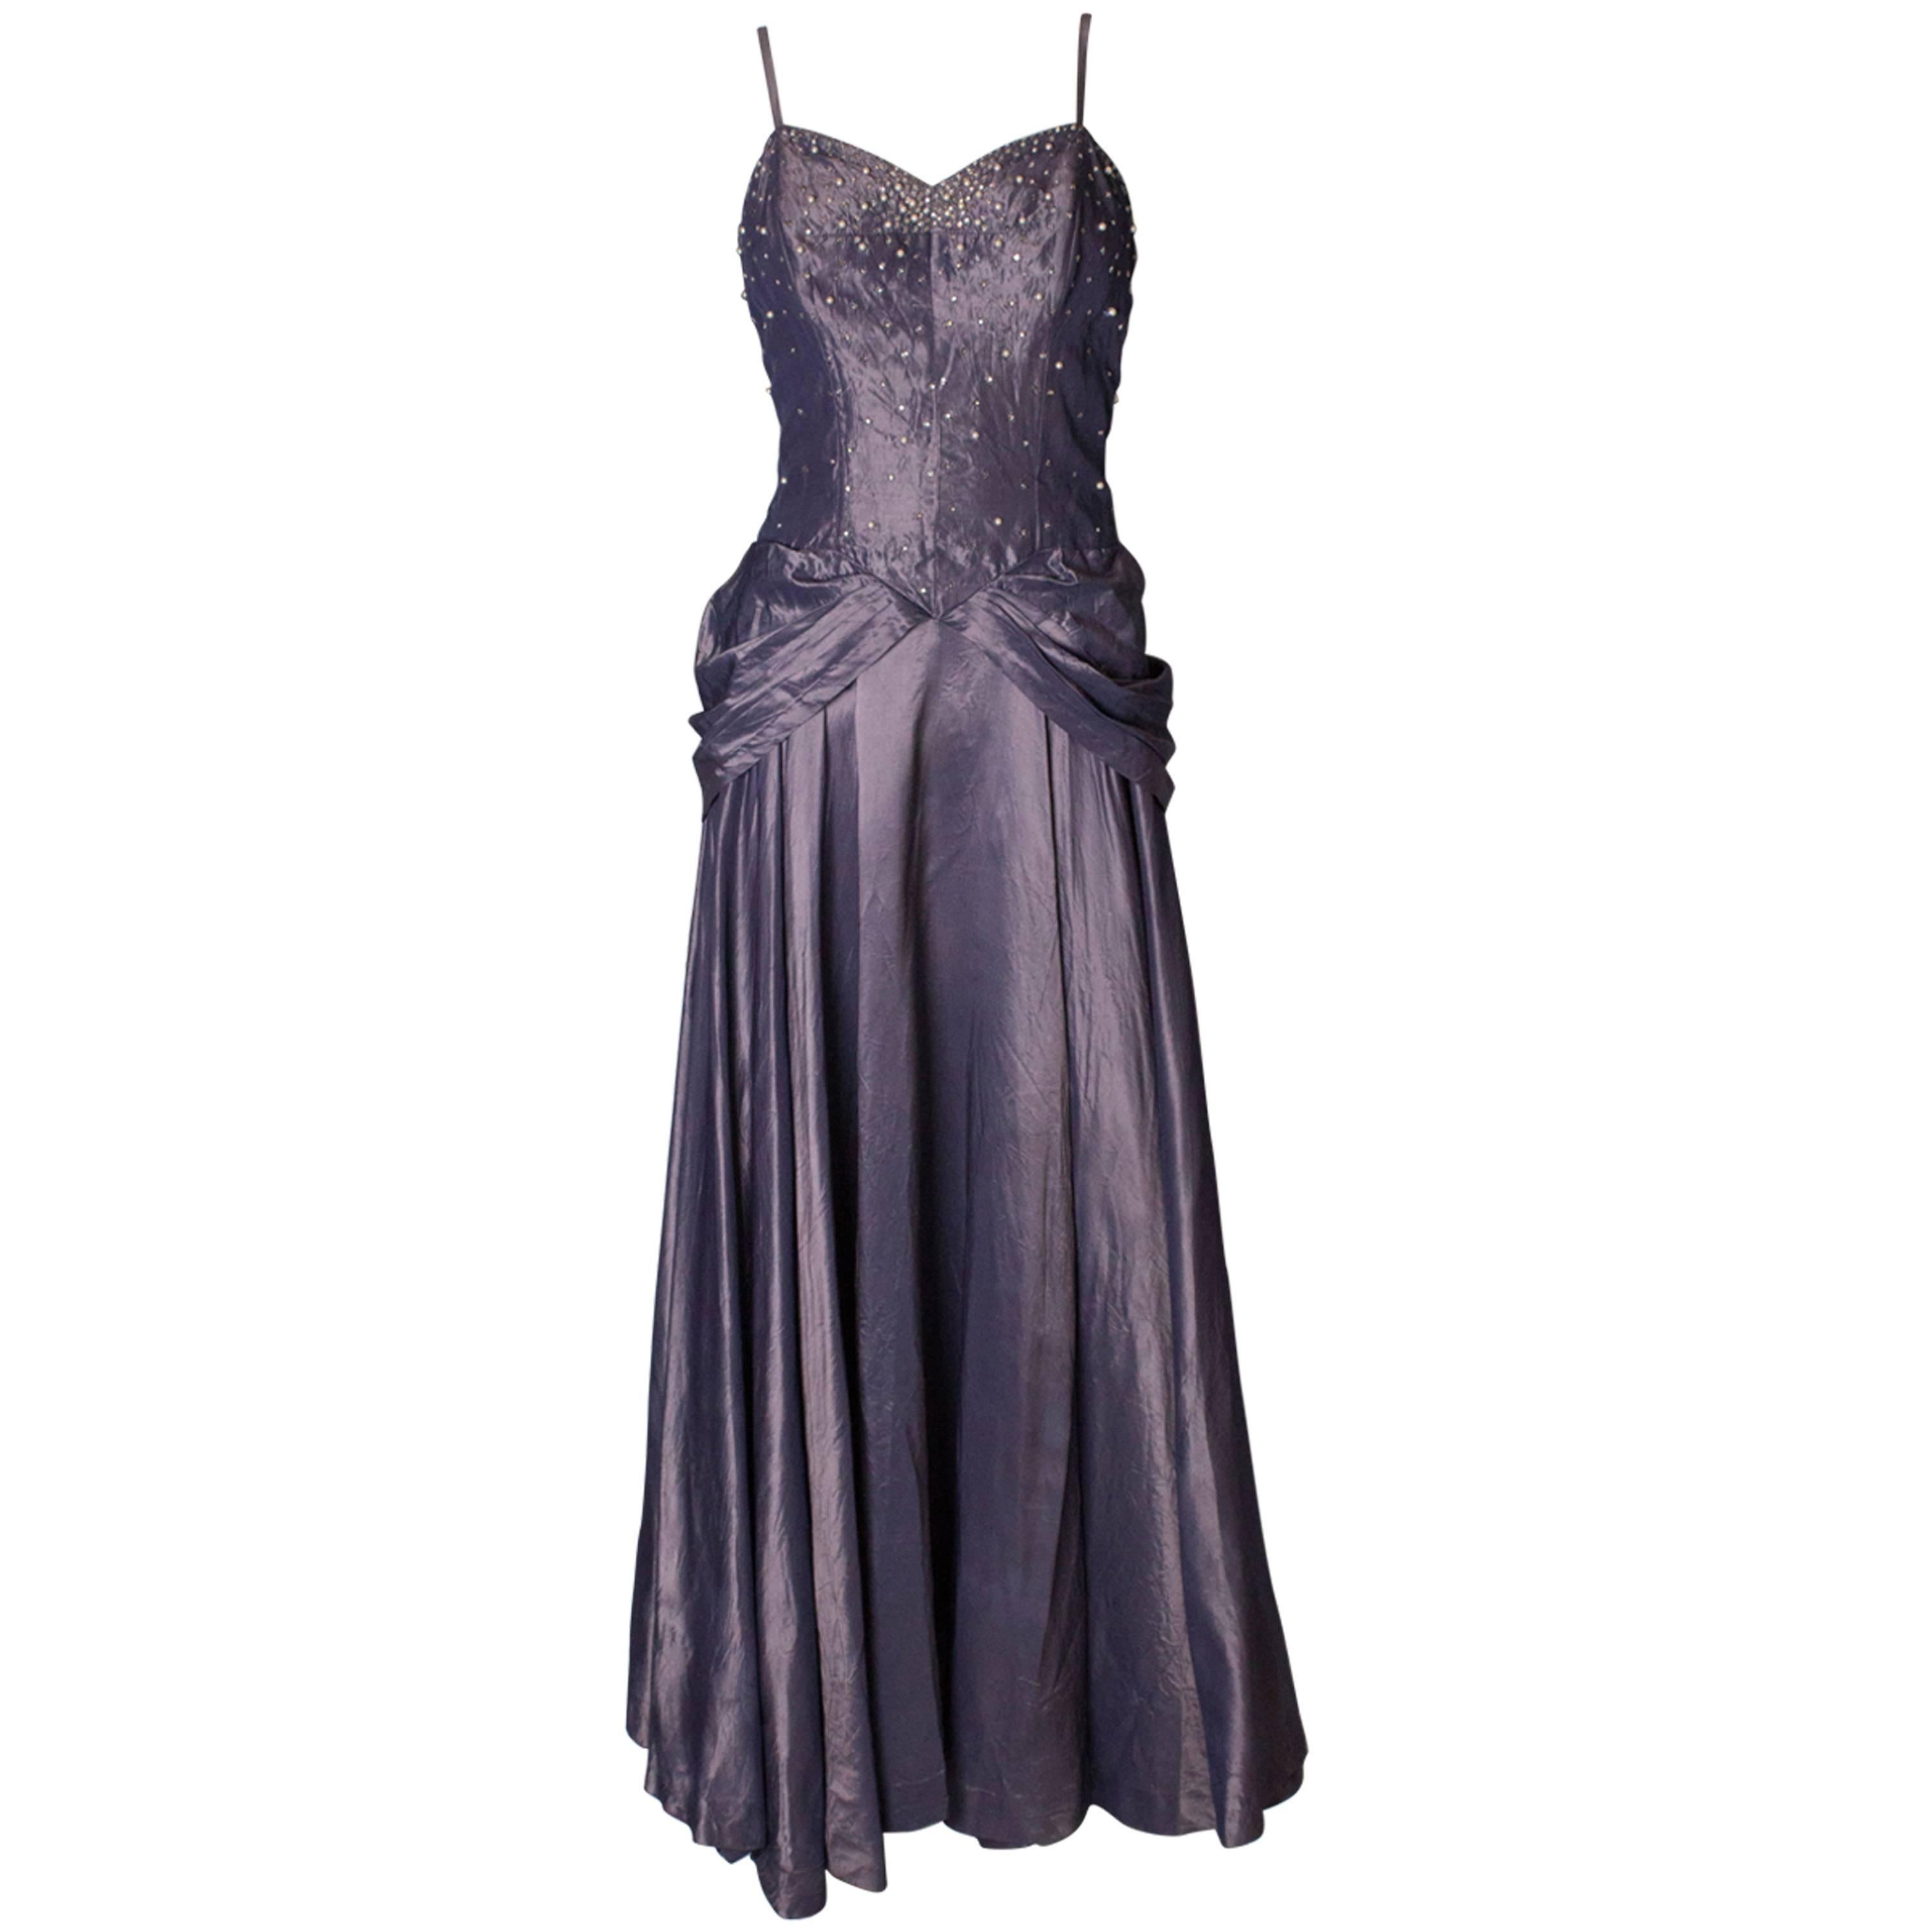 A vintage 1940s lilac satin and diamante Robert Goldberg Evening Gown